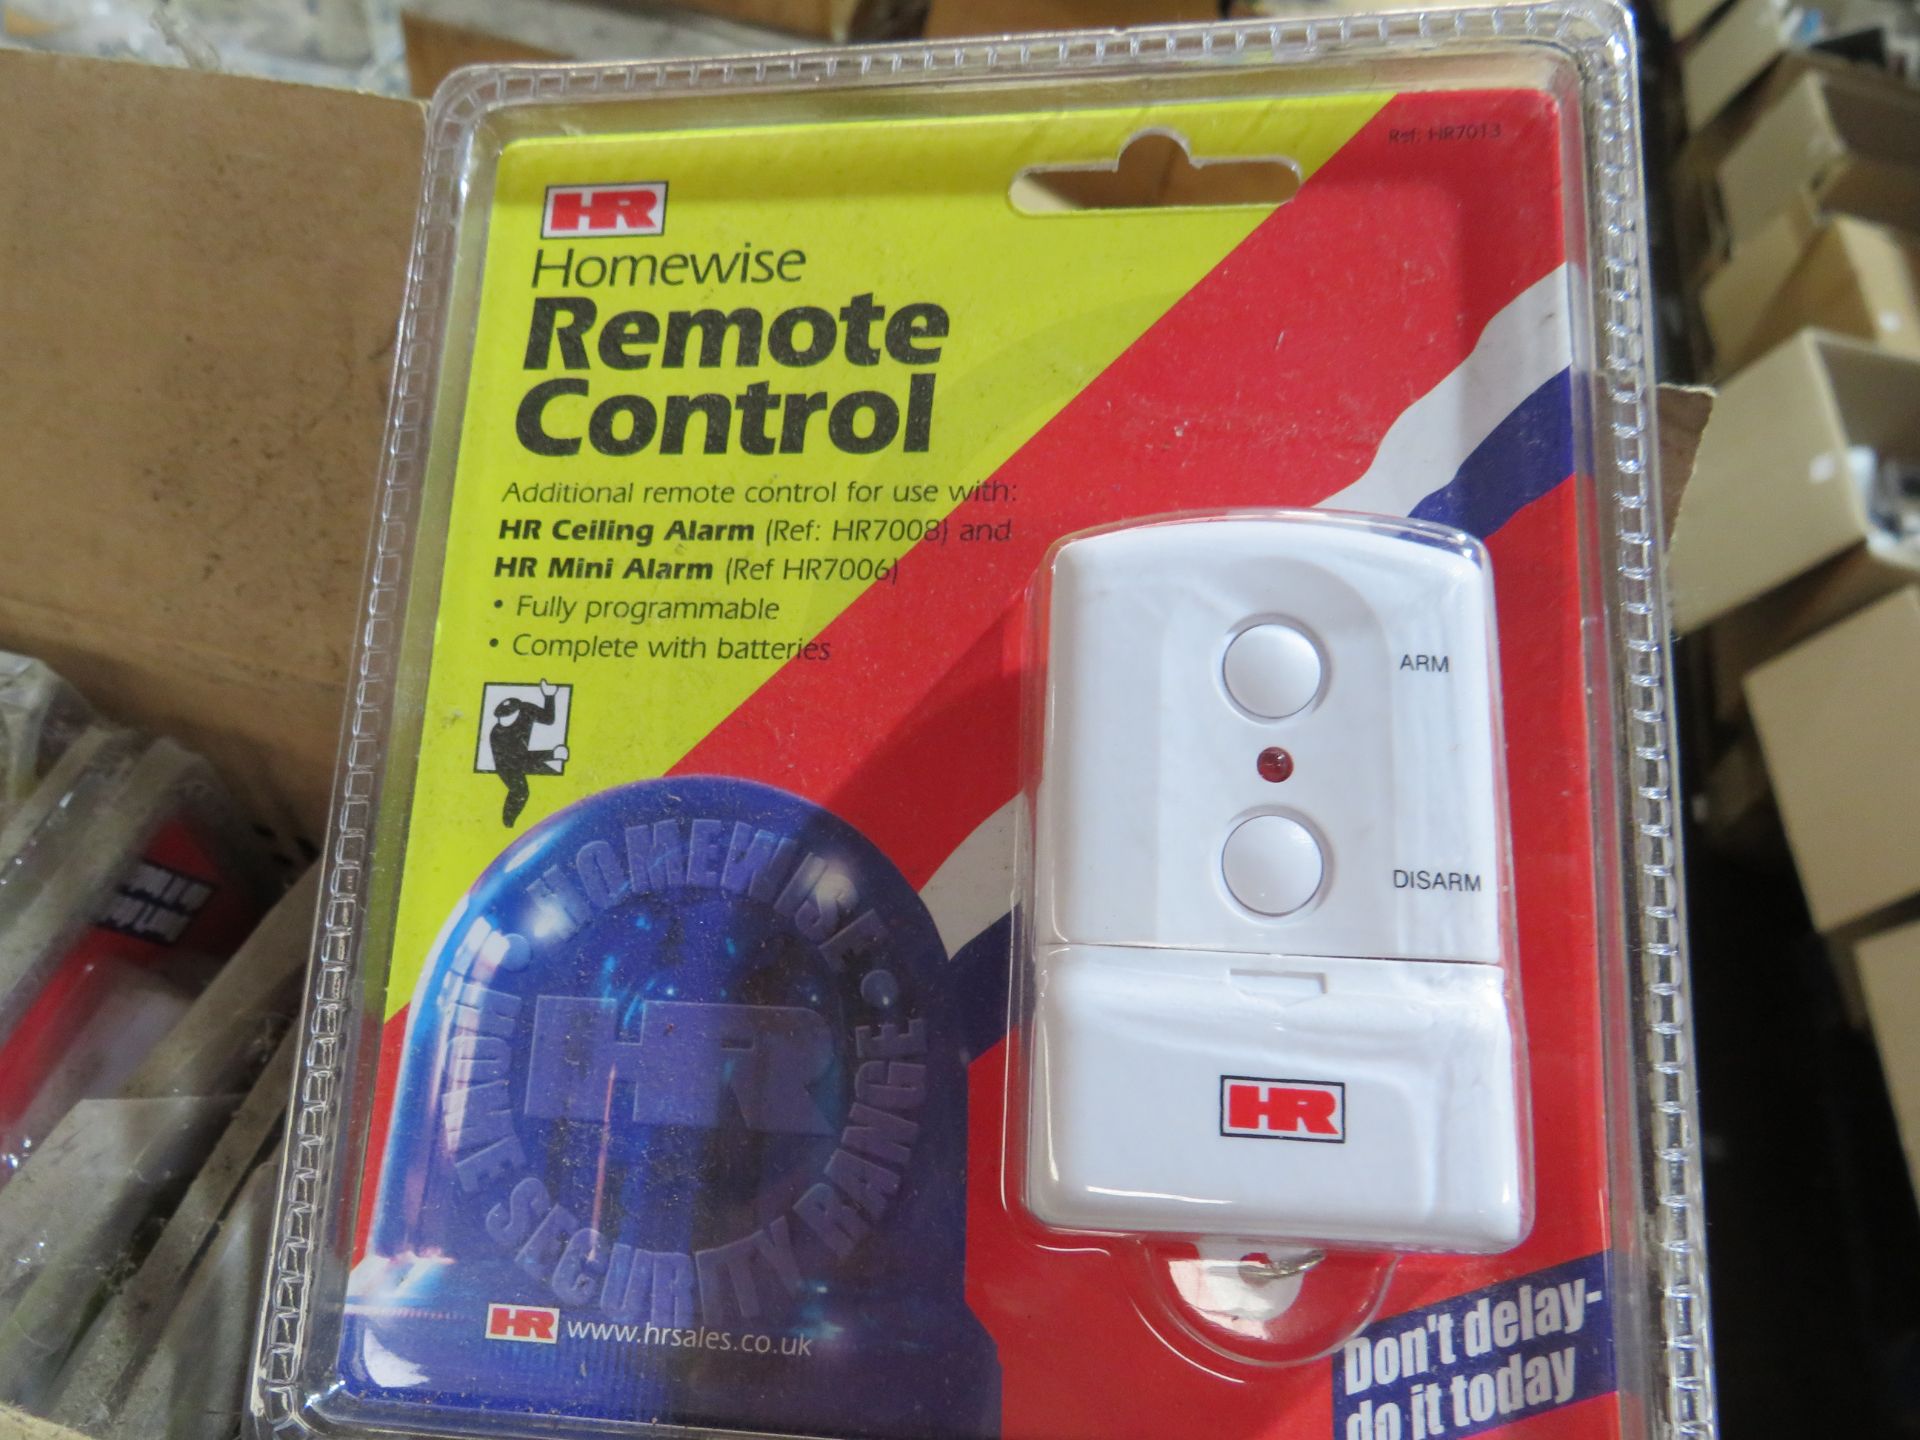 Box of 25x HR Homewise remote control fob, new and boxed